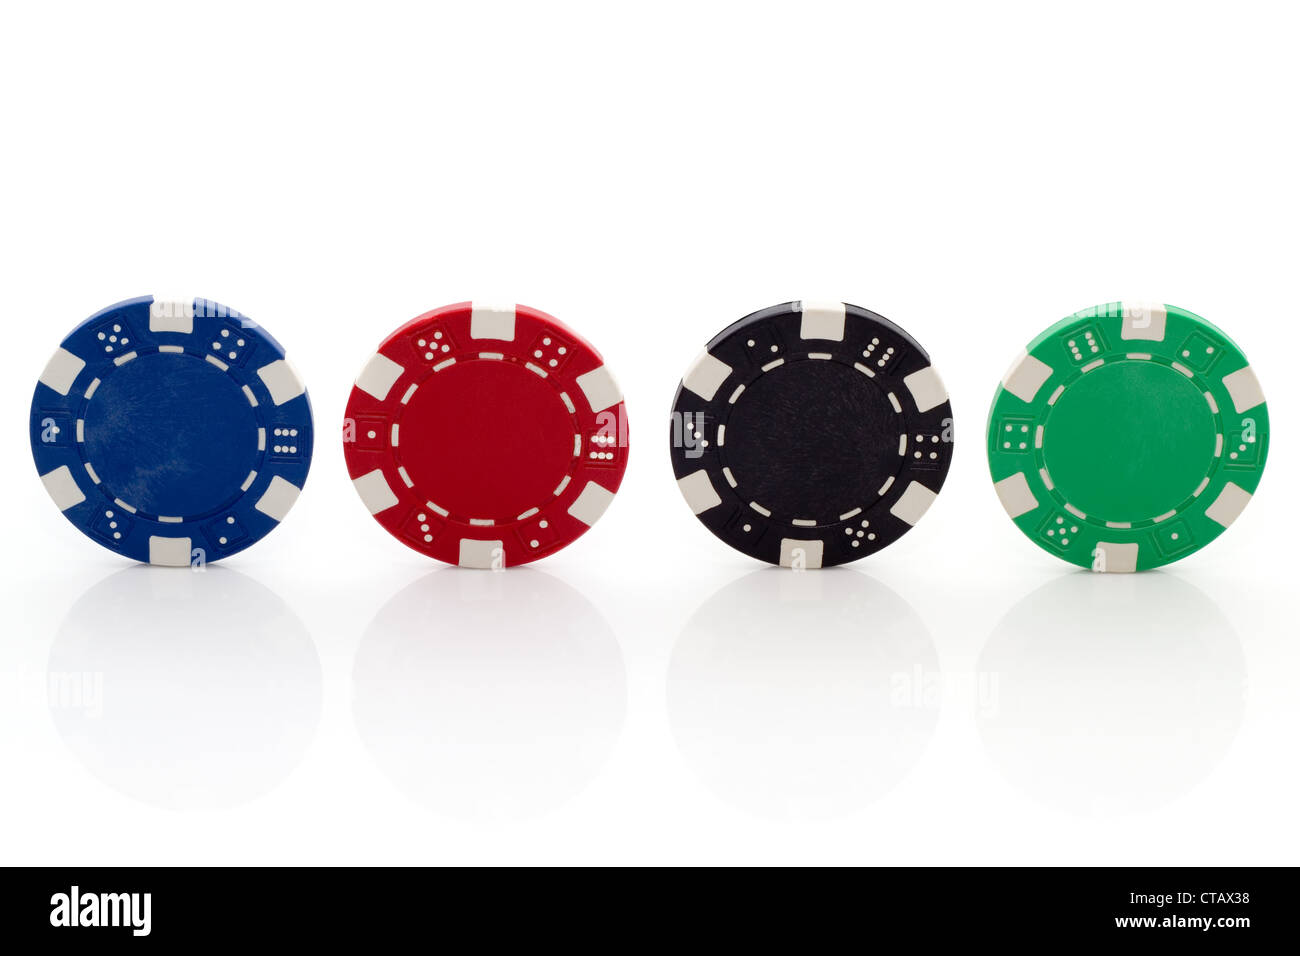 Four Different Poker Chips on White Background Stock Photo